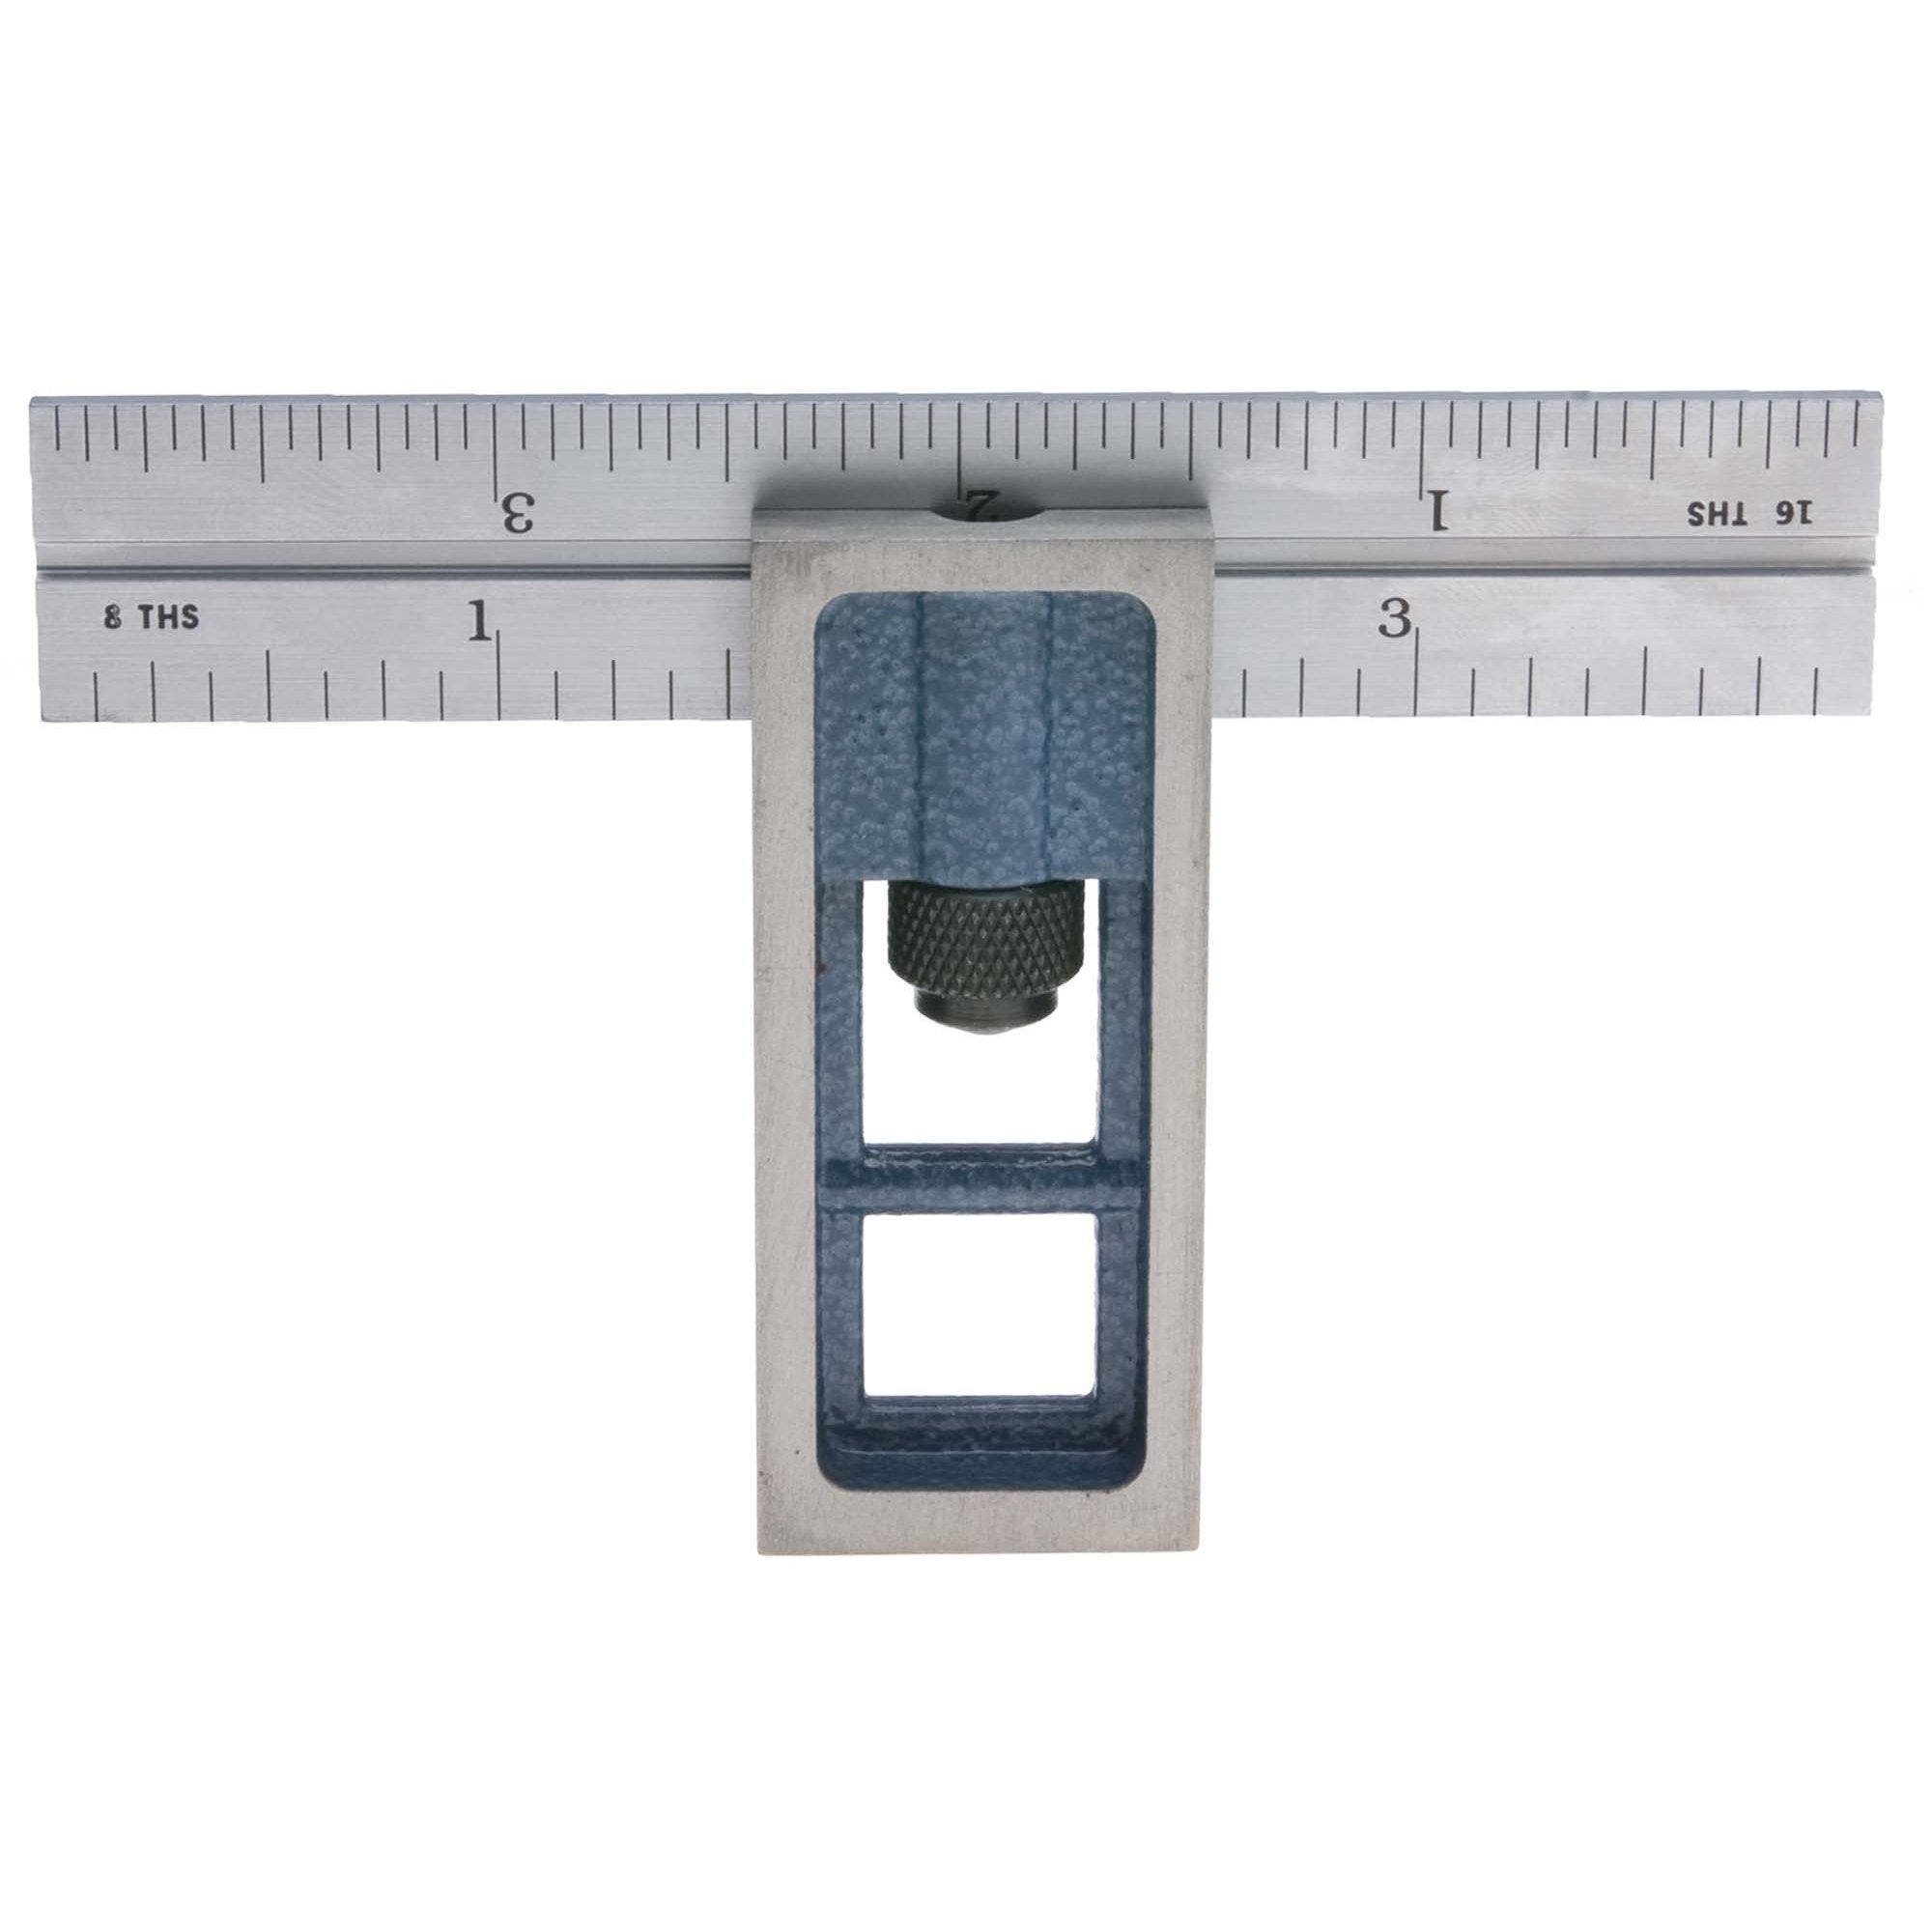 PEC Tools 12 300 mm English / Metric black chrome, high contrast  machinist ruler with markings .5mm, mm 1/32 and 1/64